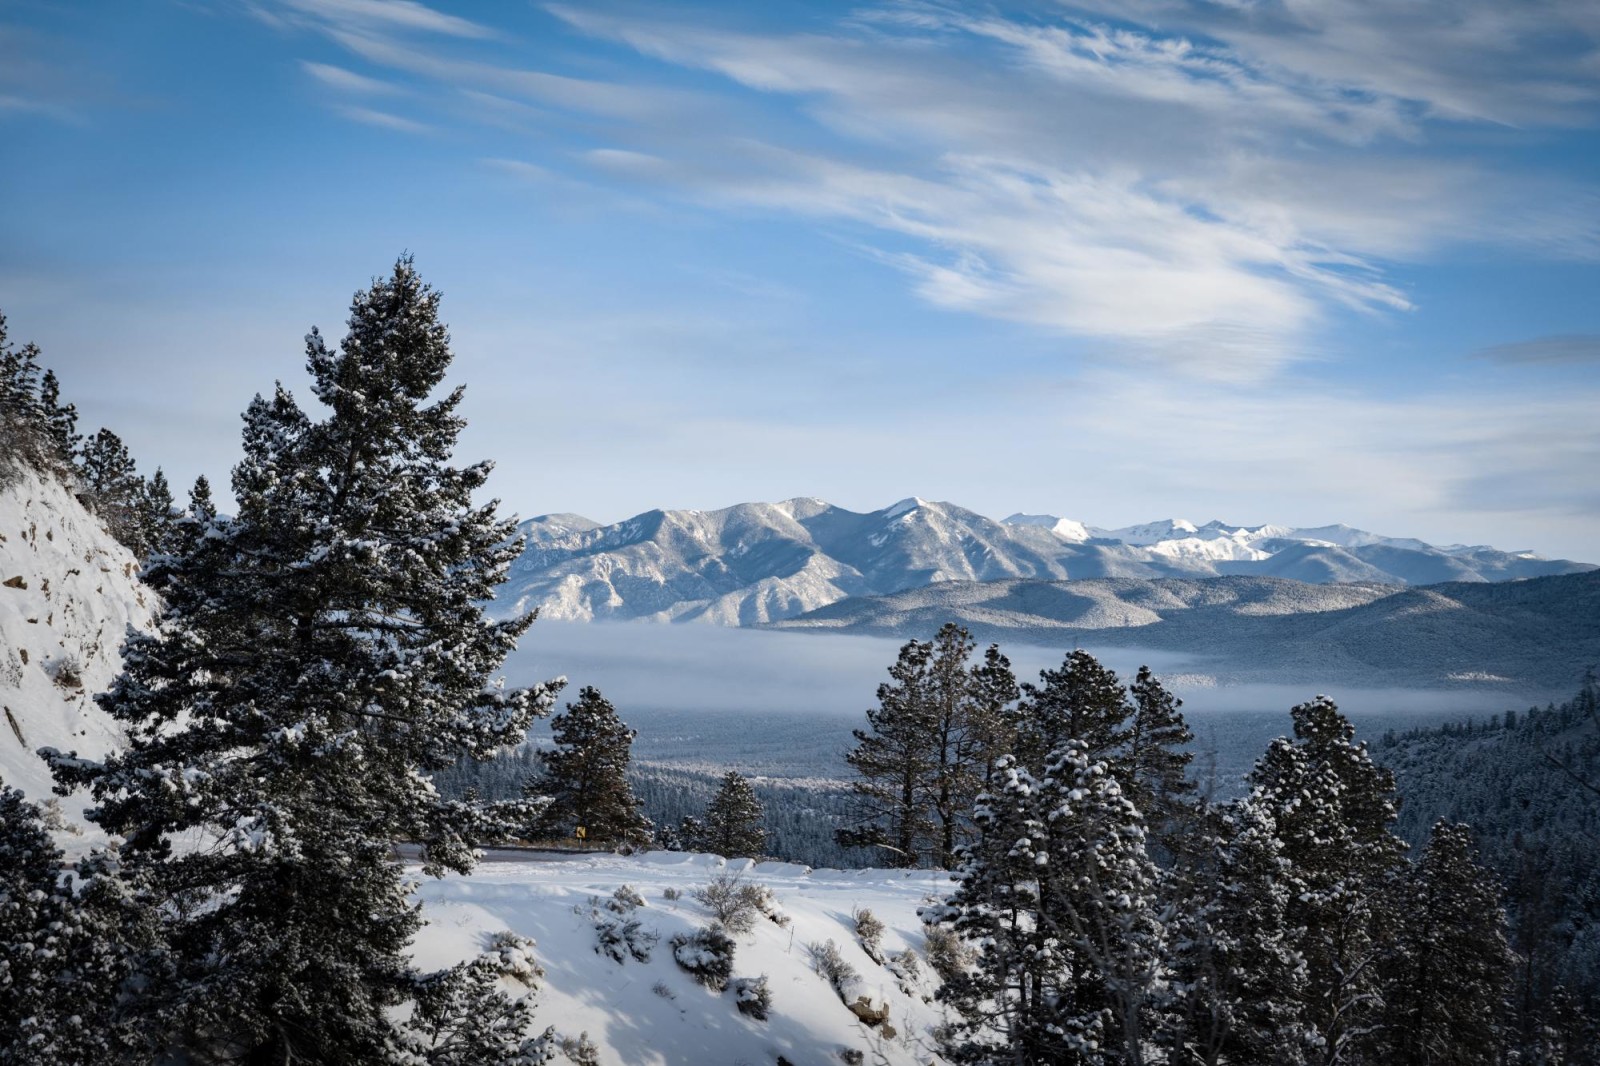 Snowy mountains with pine trees in New Mexico on a clear day.